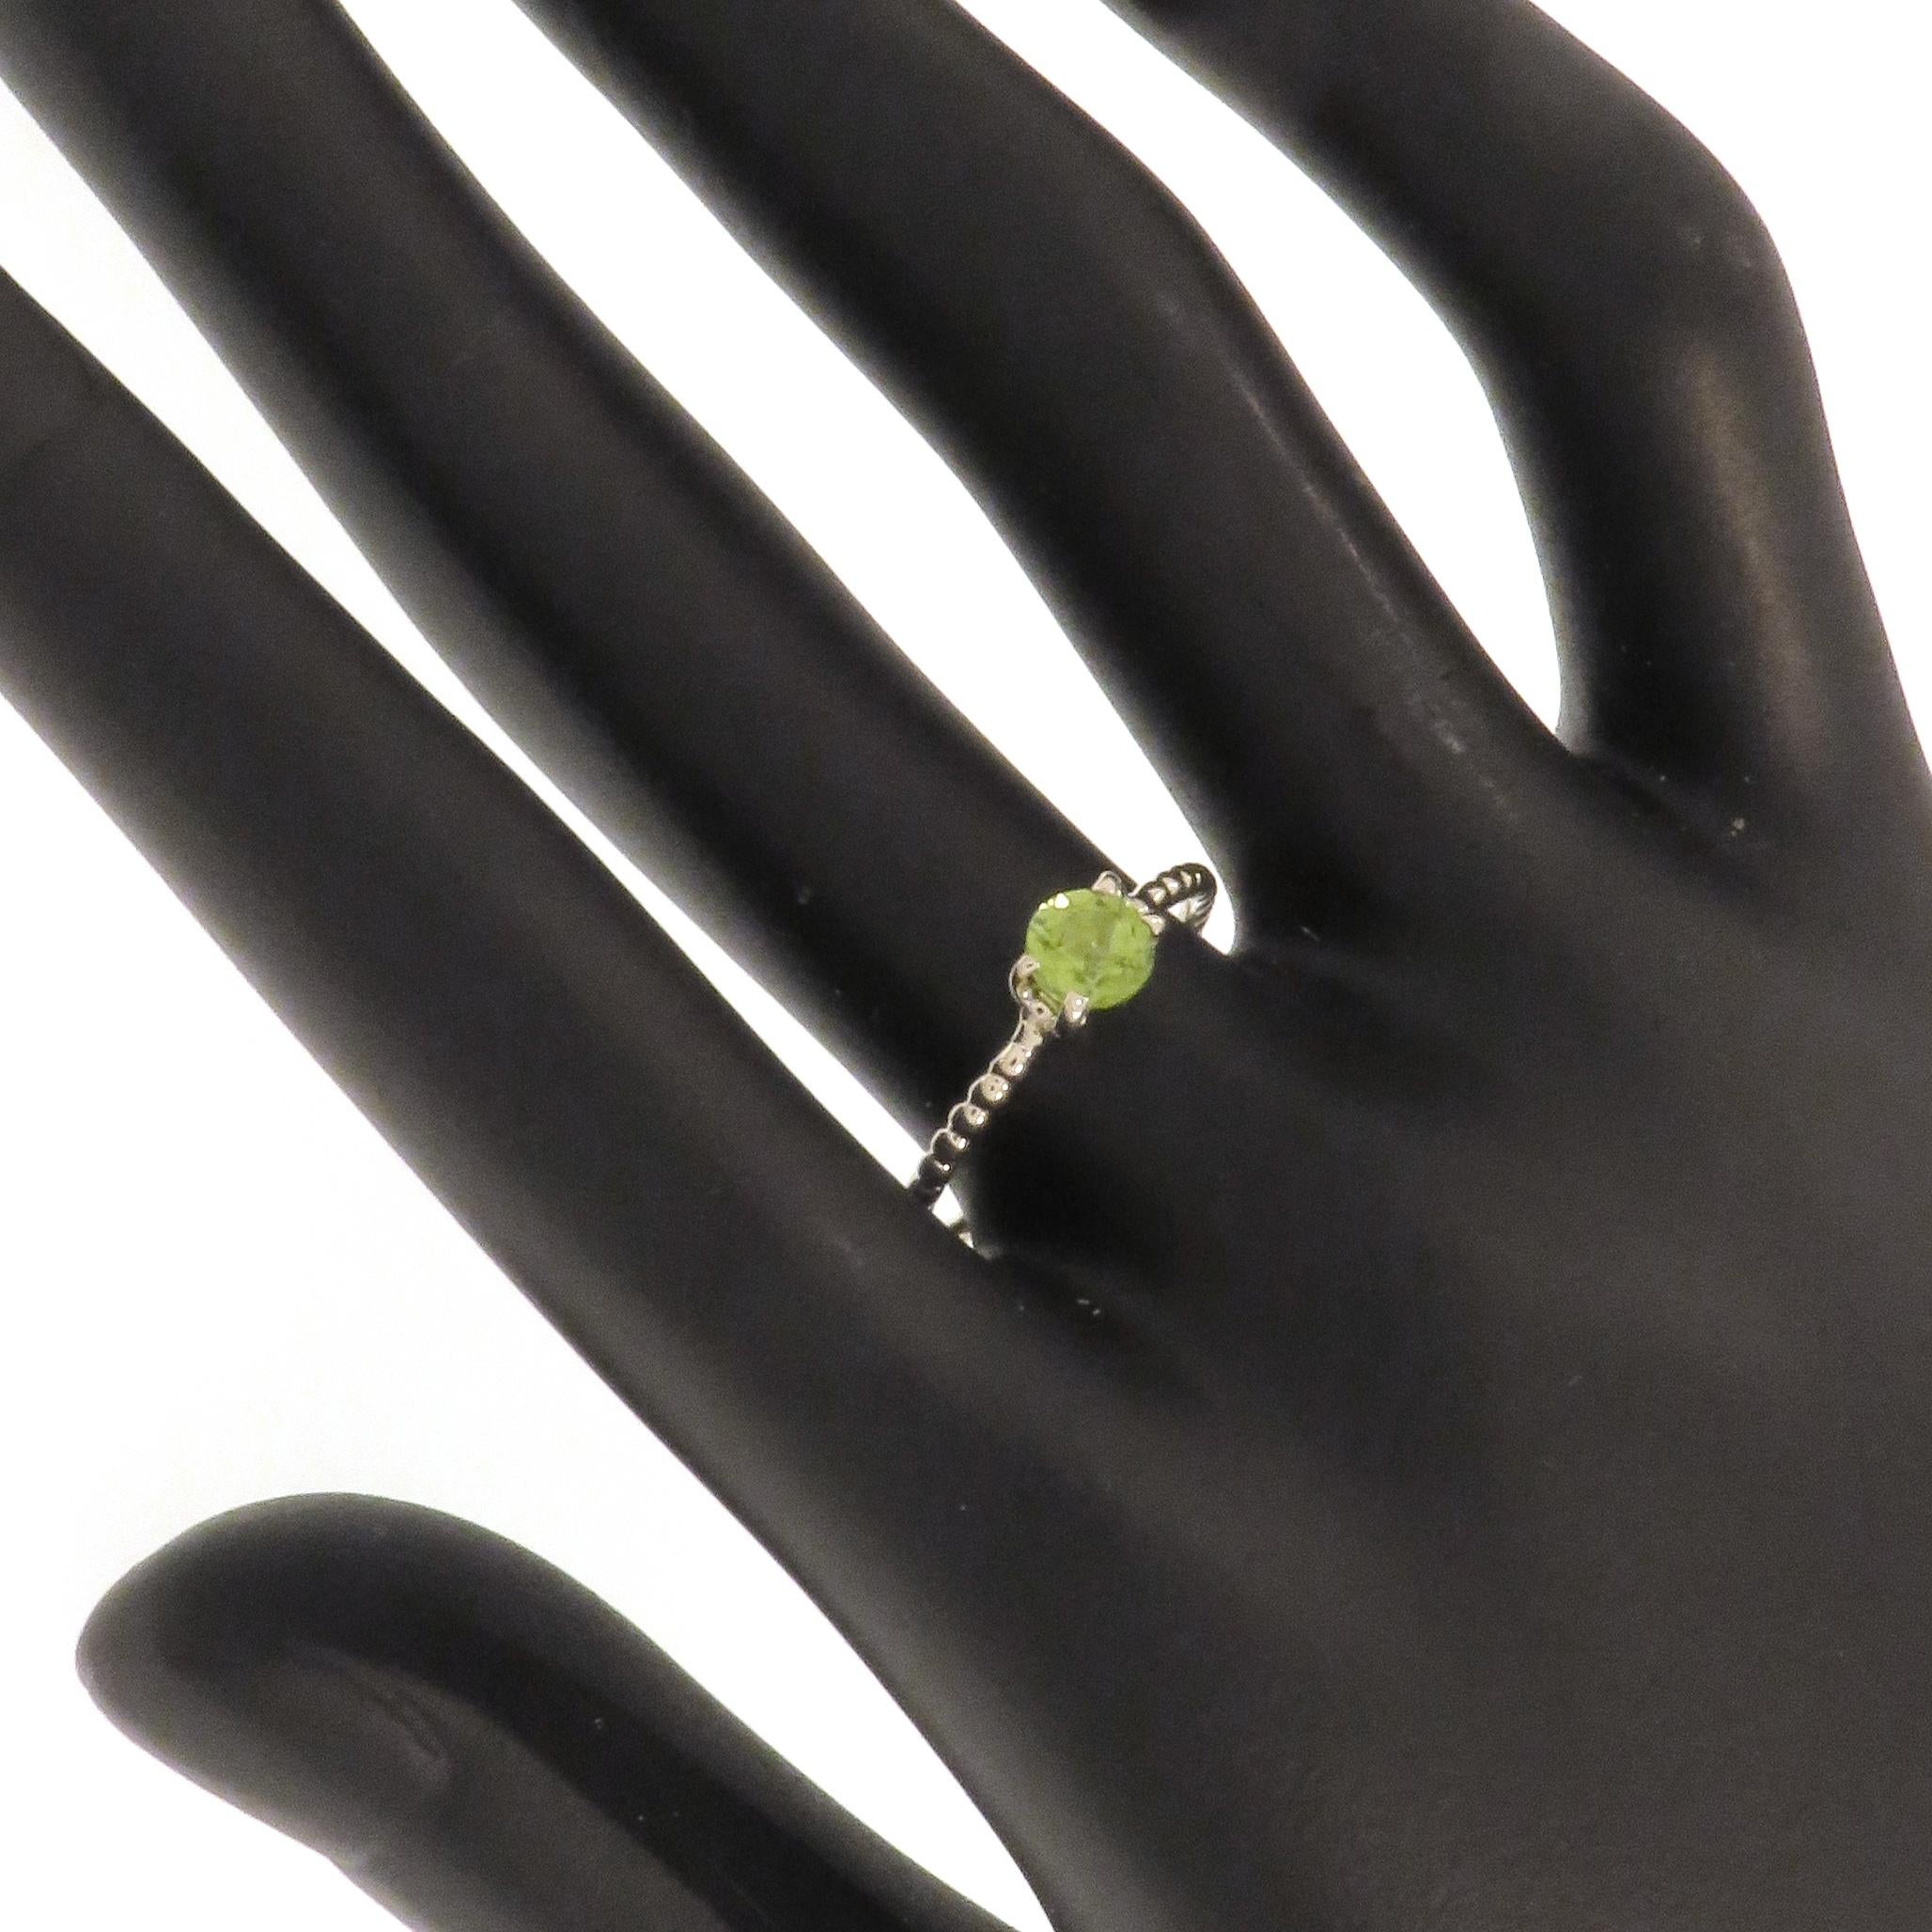 Stacking ring handmade in 9 carat white gold with brilliant cut peridot 6 mm / 0.039 inches. Finger size: US size 7, Italian size 14, UK size O, French size 54. The ring can be re-sized to the customer's size before shipping. 
Total weight: 1.4